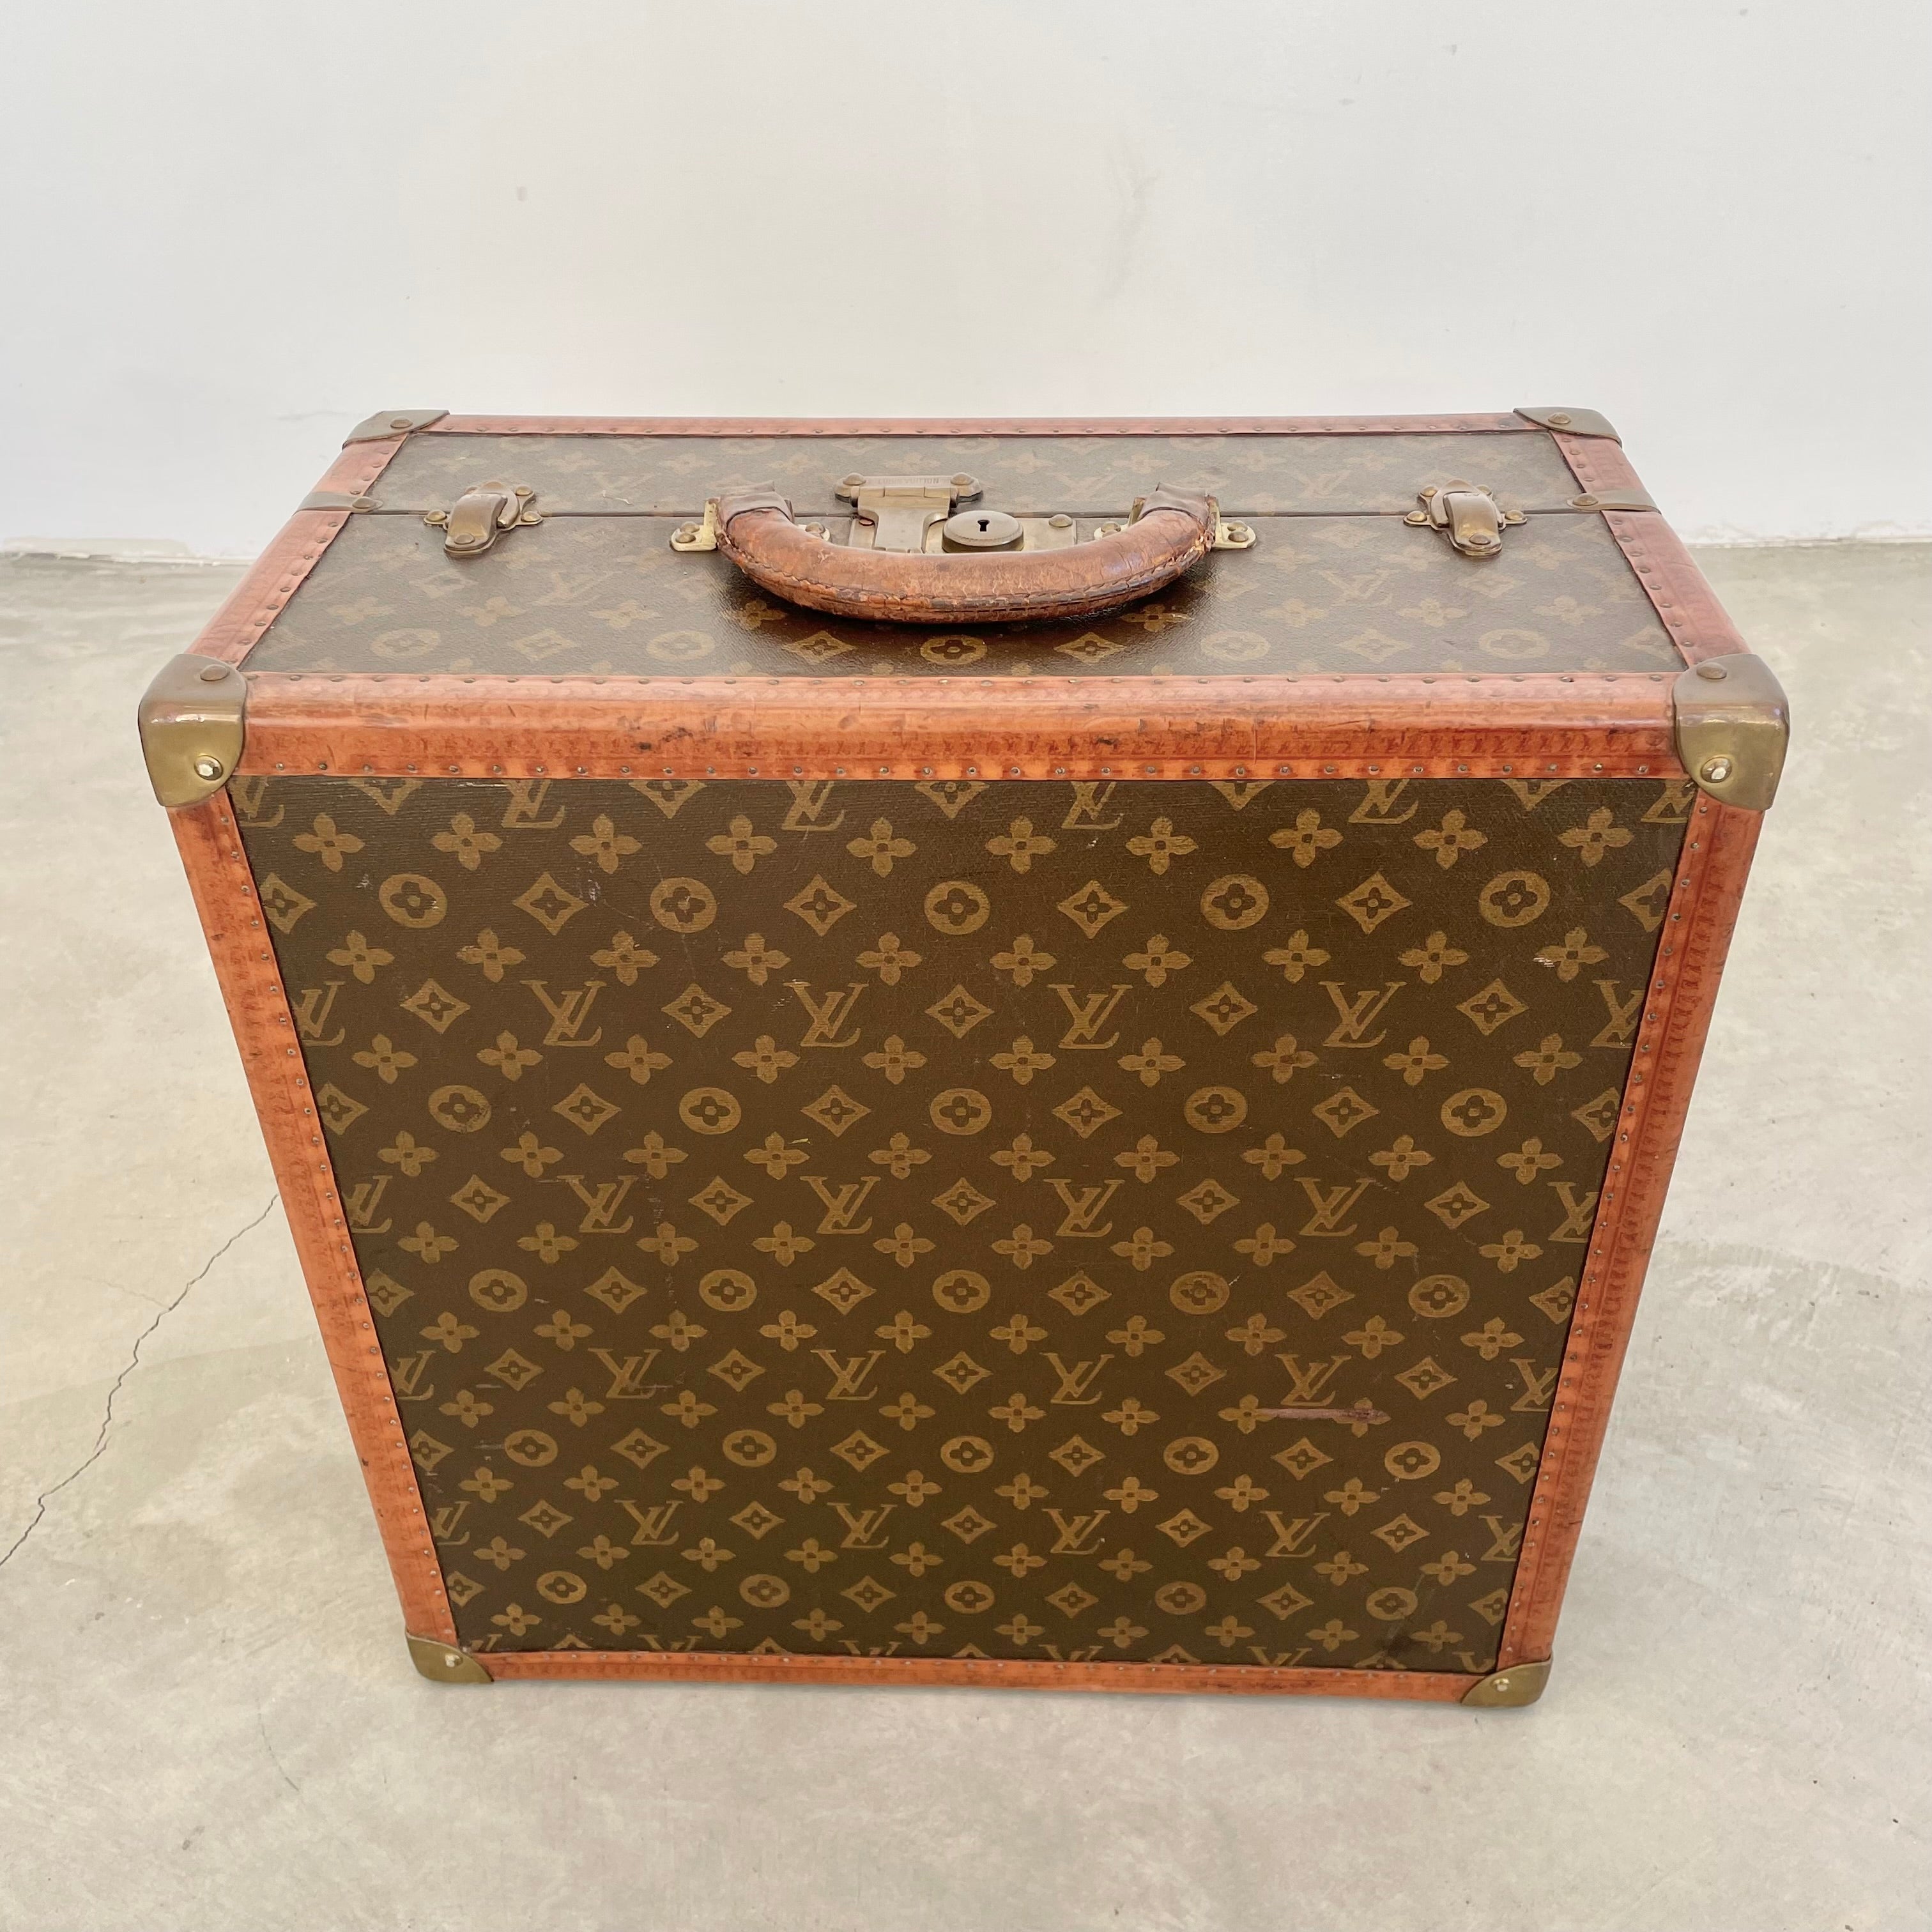 Oh, My Stars and Garters! : 4 19th Century French Trunk by Louis